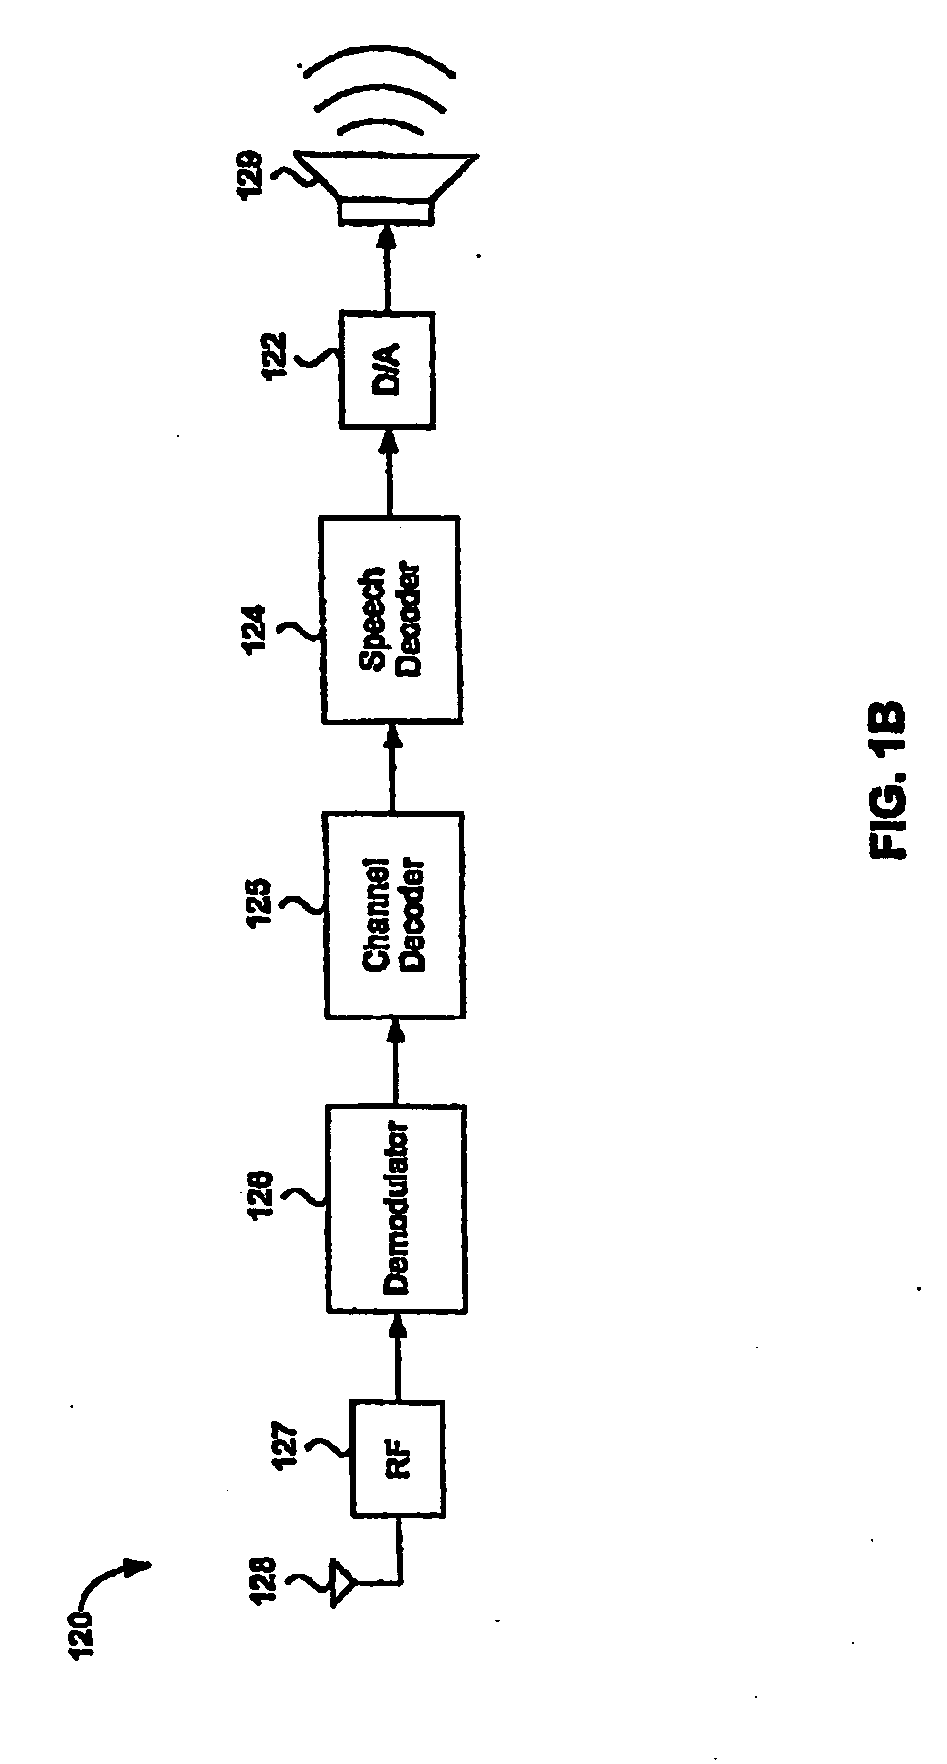 Echo cancellation in telephones with multiple microphones